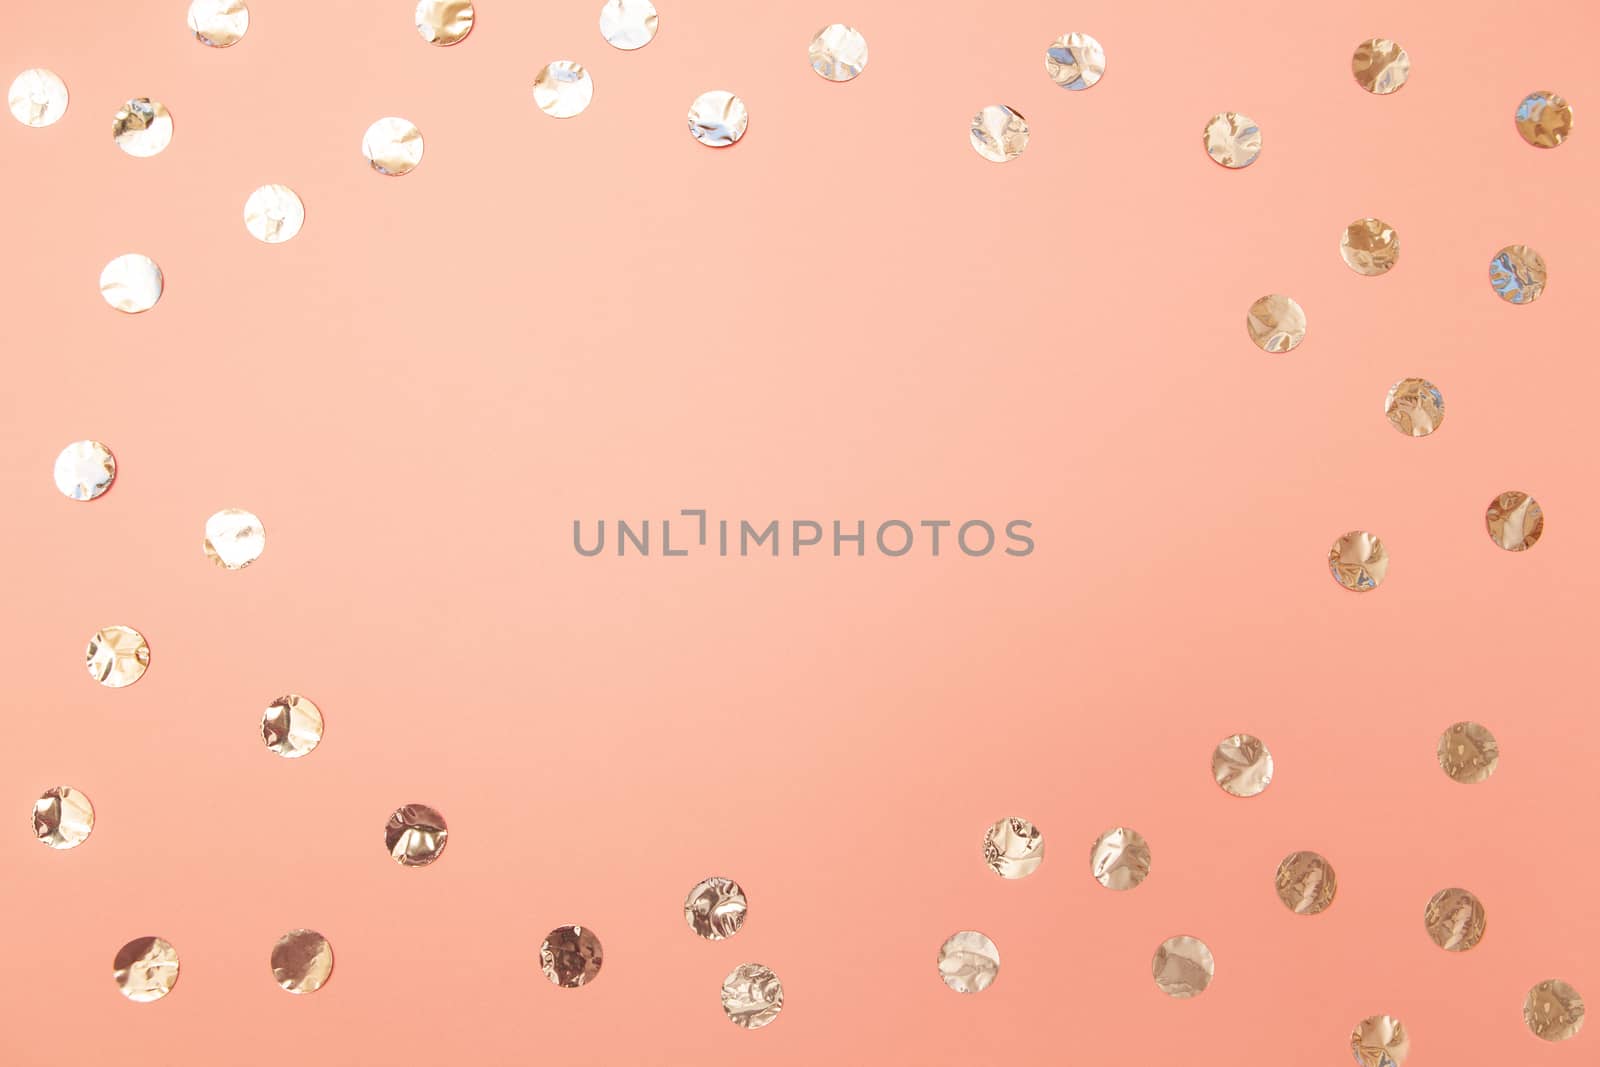 Frame of shiny silver confetti on pastel millennial pink paper background. Concept of holiday, birthday, blogging. Top view. Flat lay. Minimal style. Template for female blog. Lifestyle. Copy space.